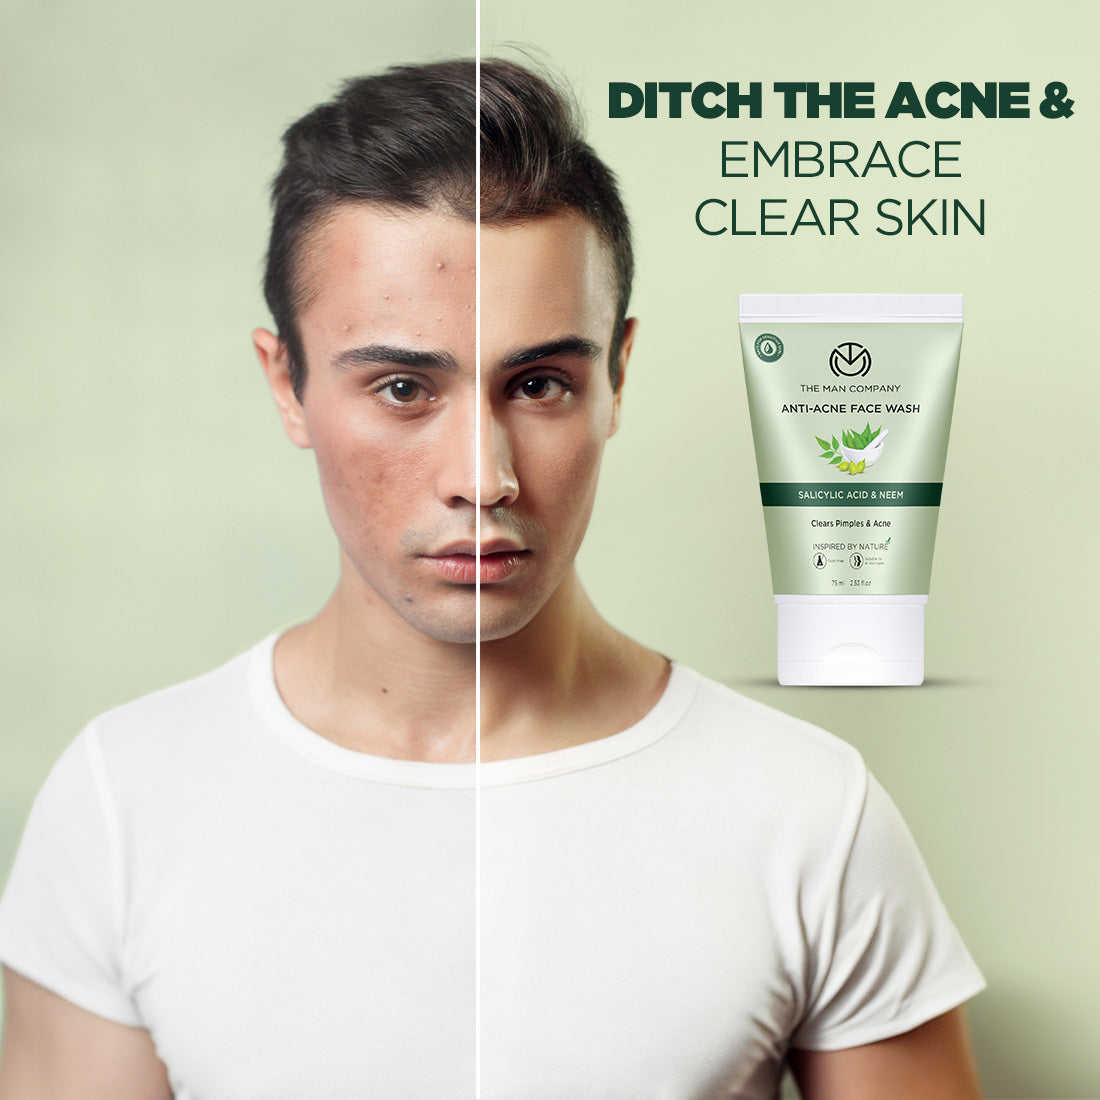 Buy Anti-Acne Face Wash for Acne Treatment – The Man Company